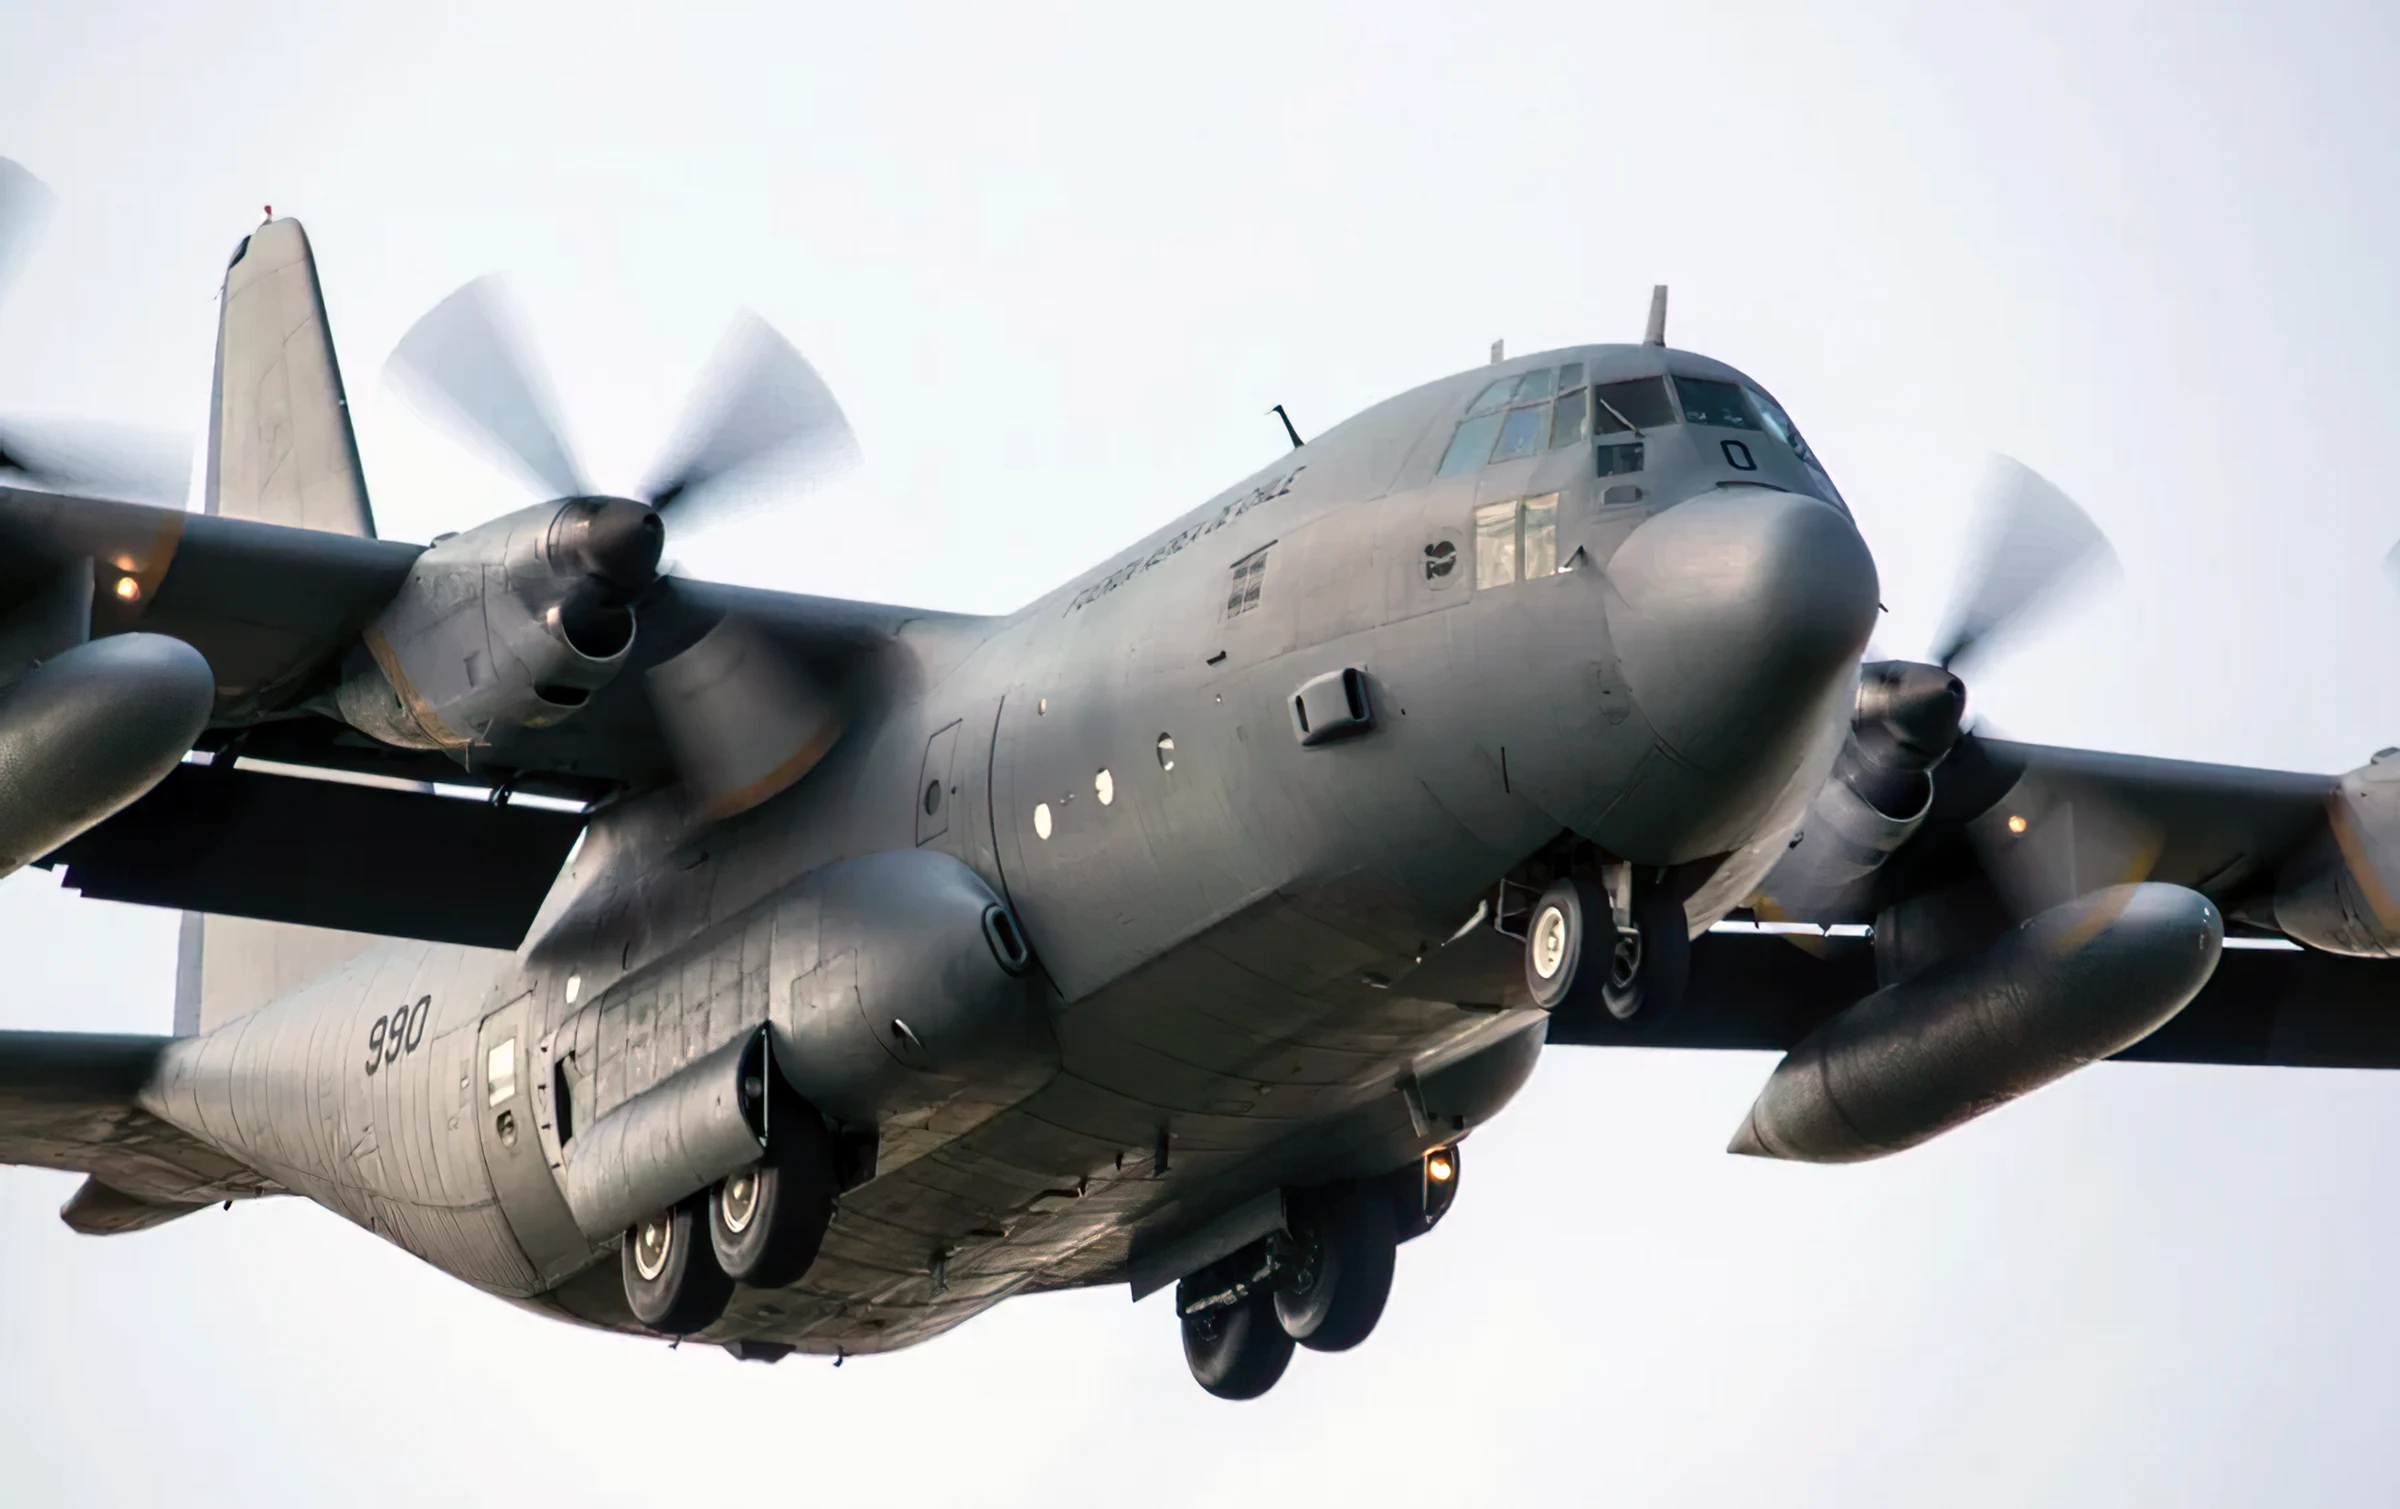 Greece receives 2 C-130 aircraft free of charge from the US